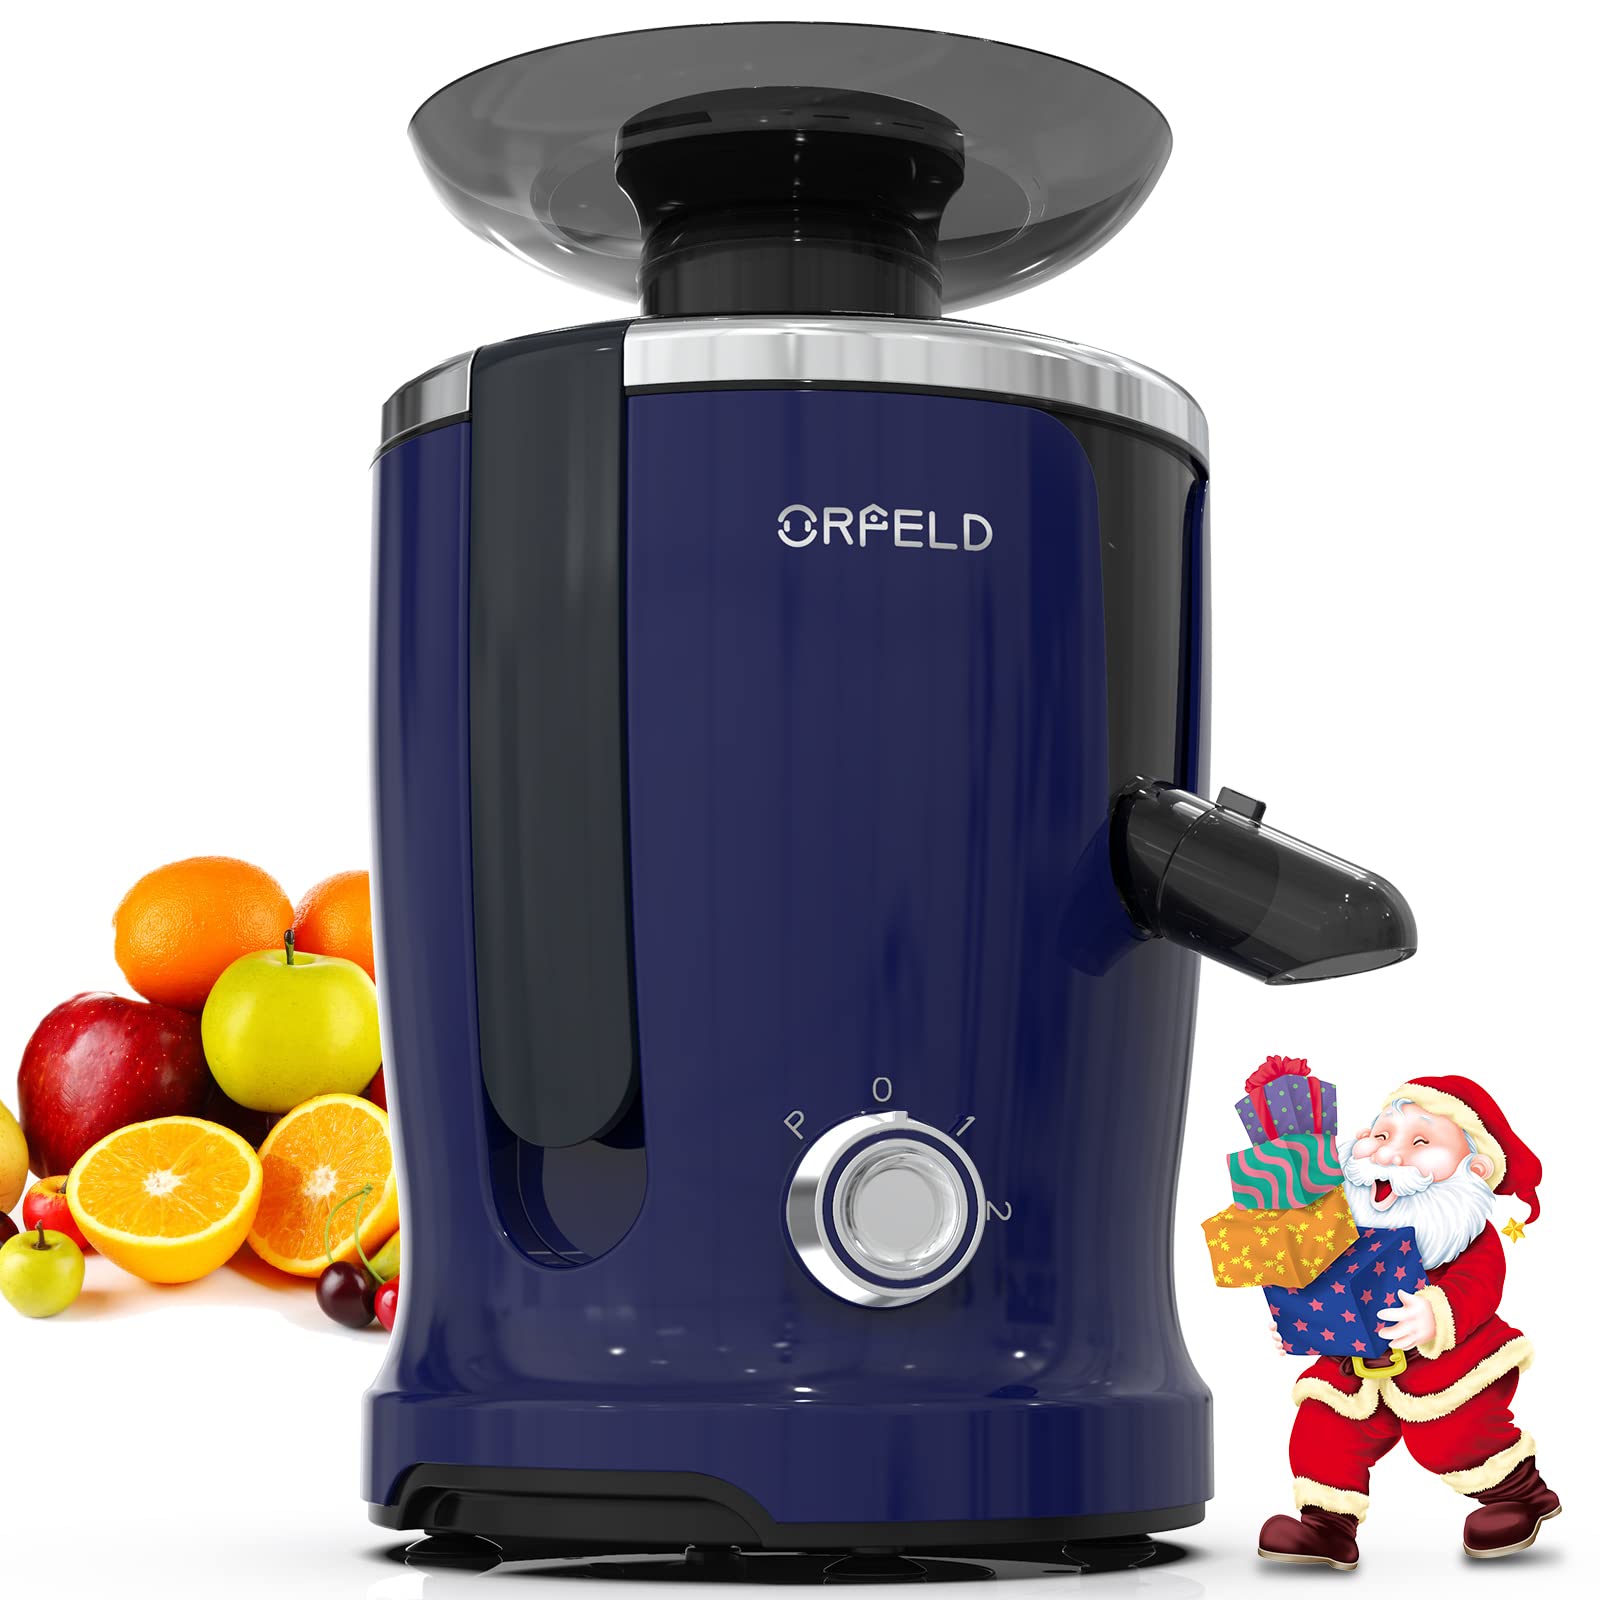 ORFELD Centrifugal Juicer 700 watts BPA-Free for Fruits & Vegetables Blue